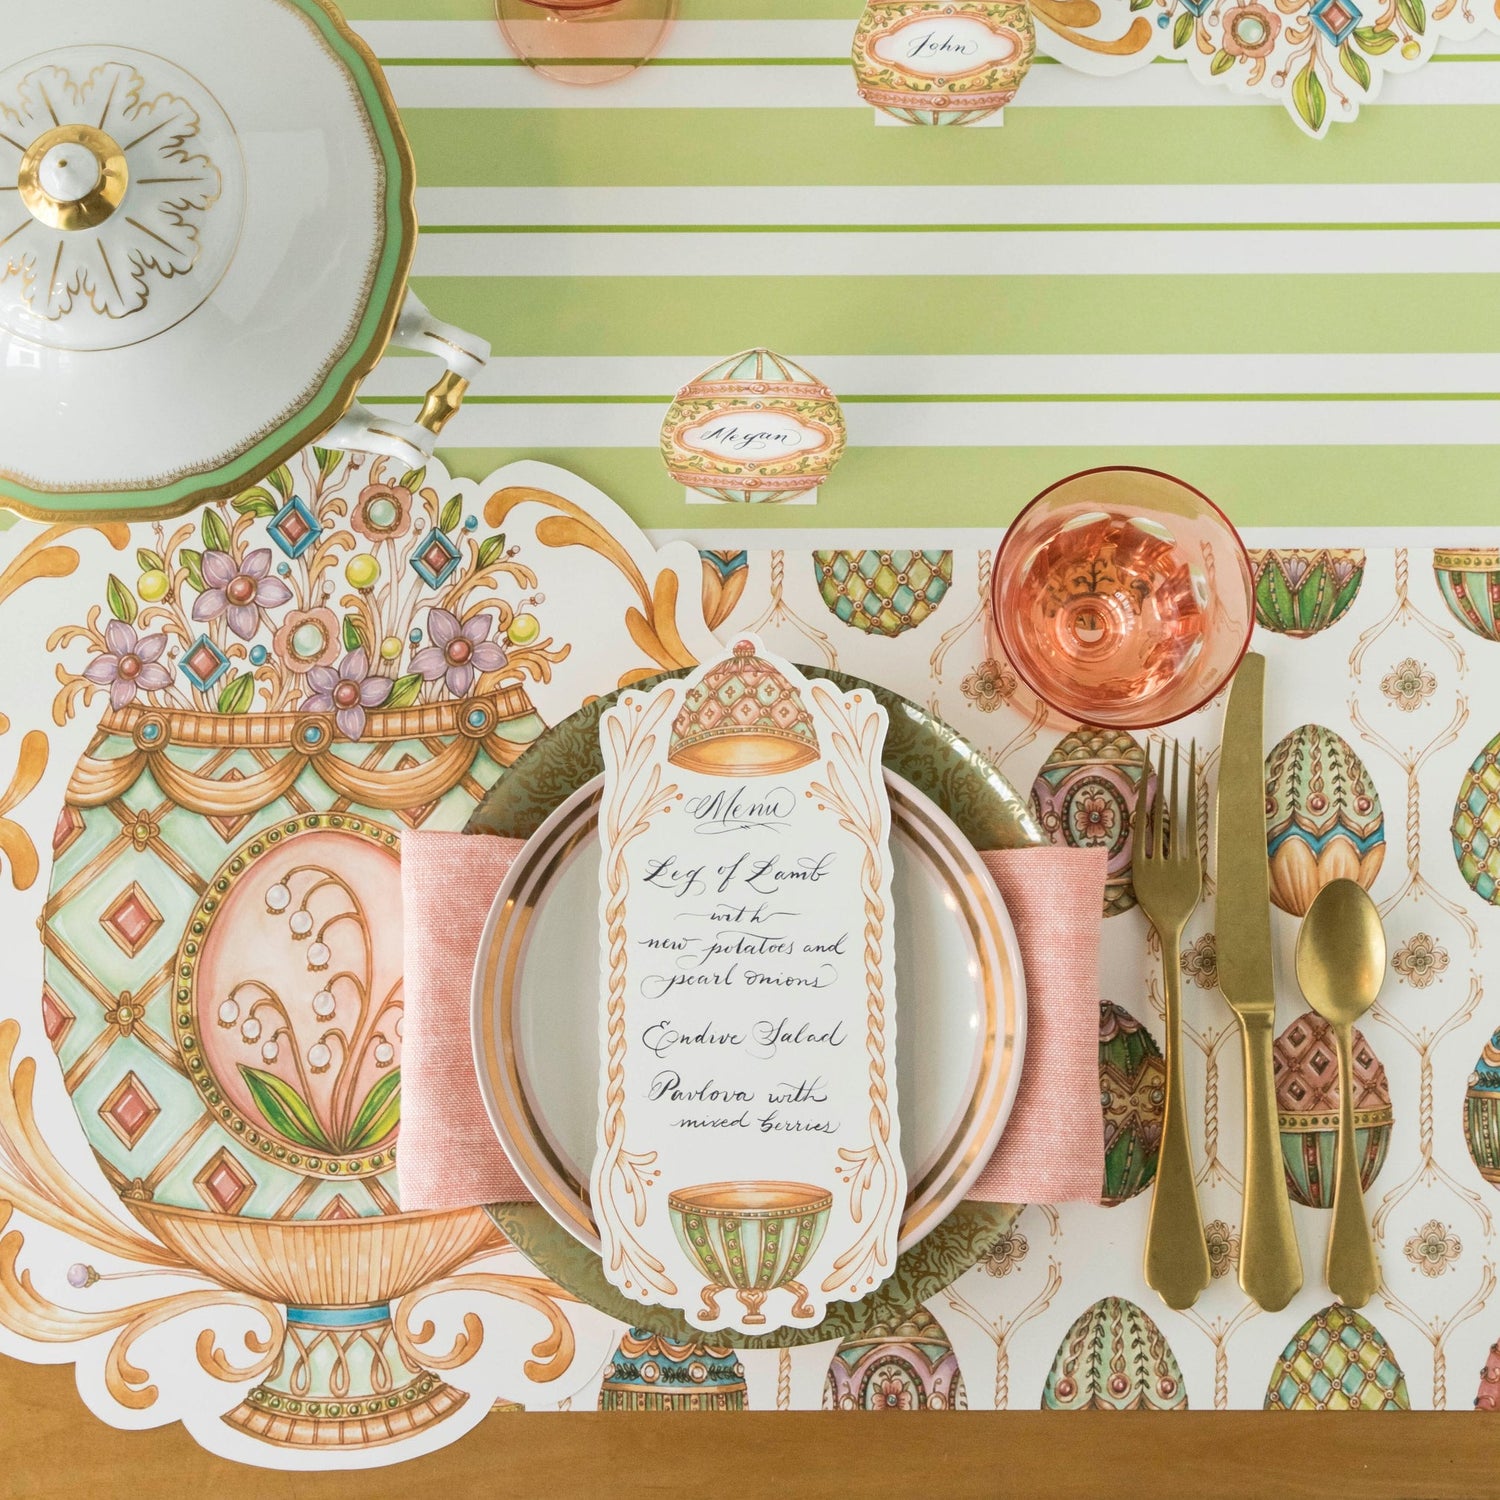 The Exquisite Egg Hunt Placemat under an elegant spring table setting, from above.